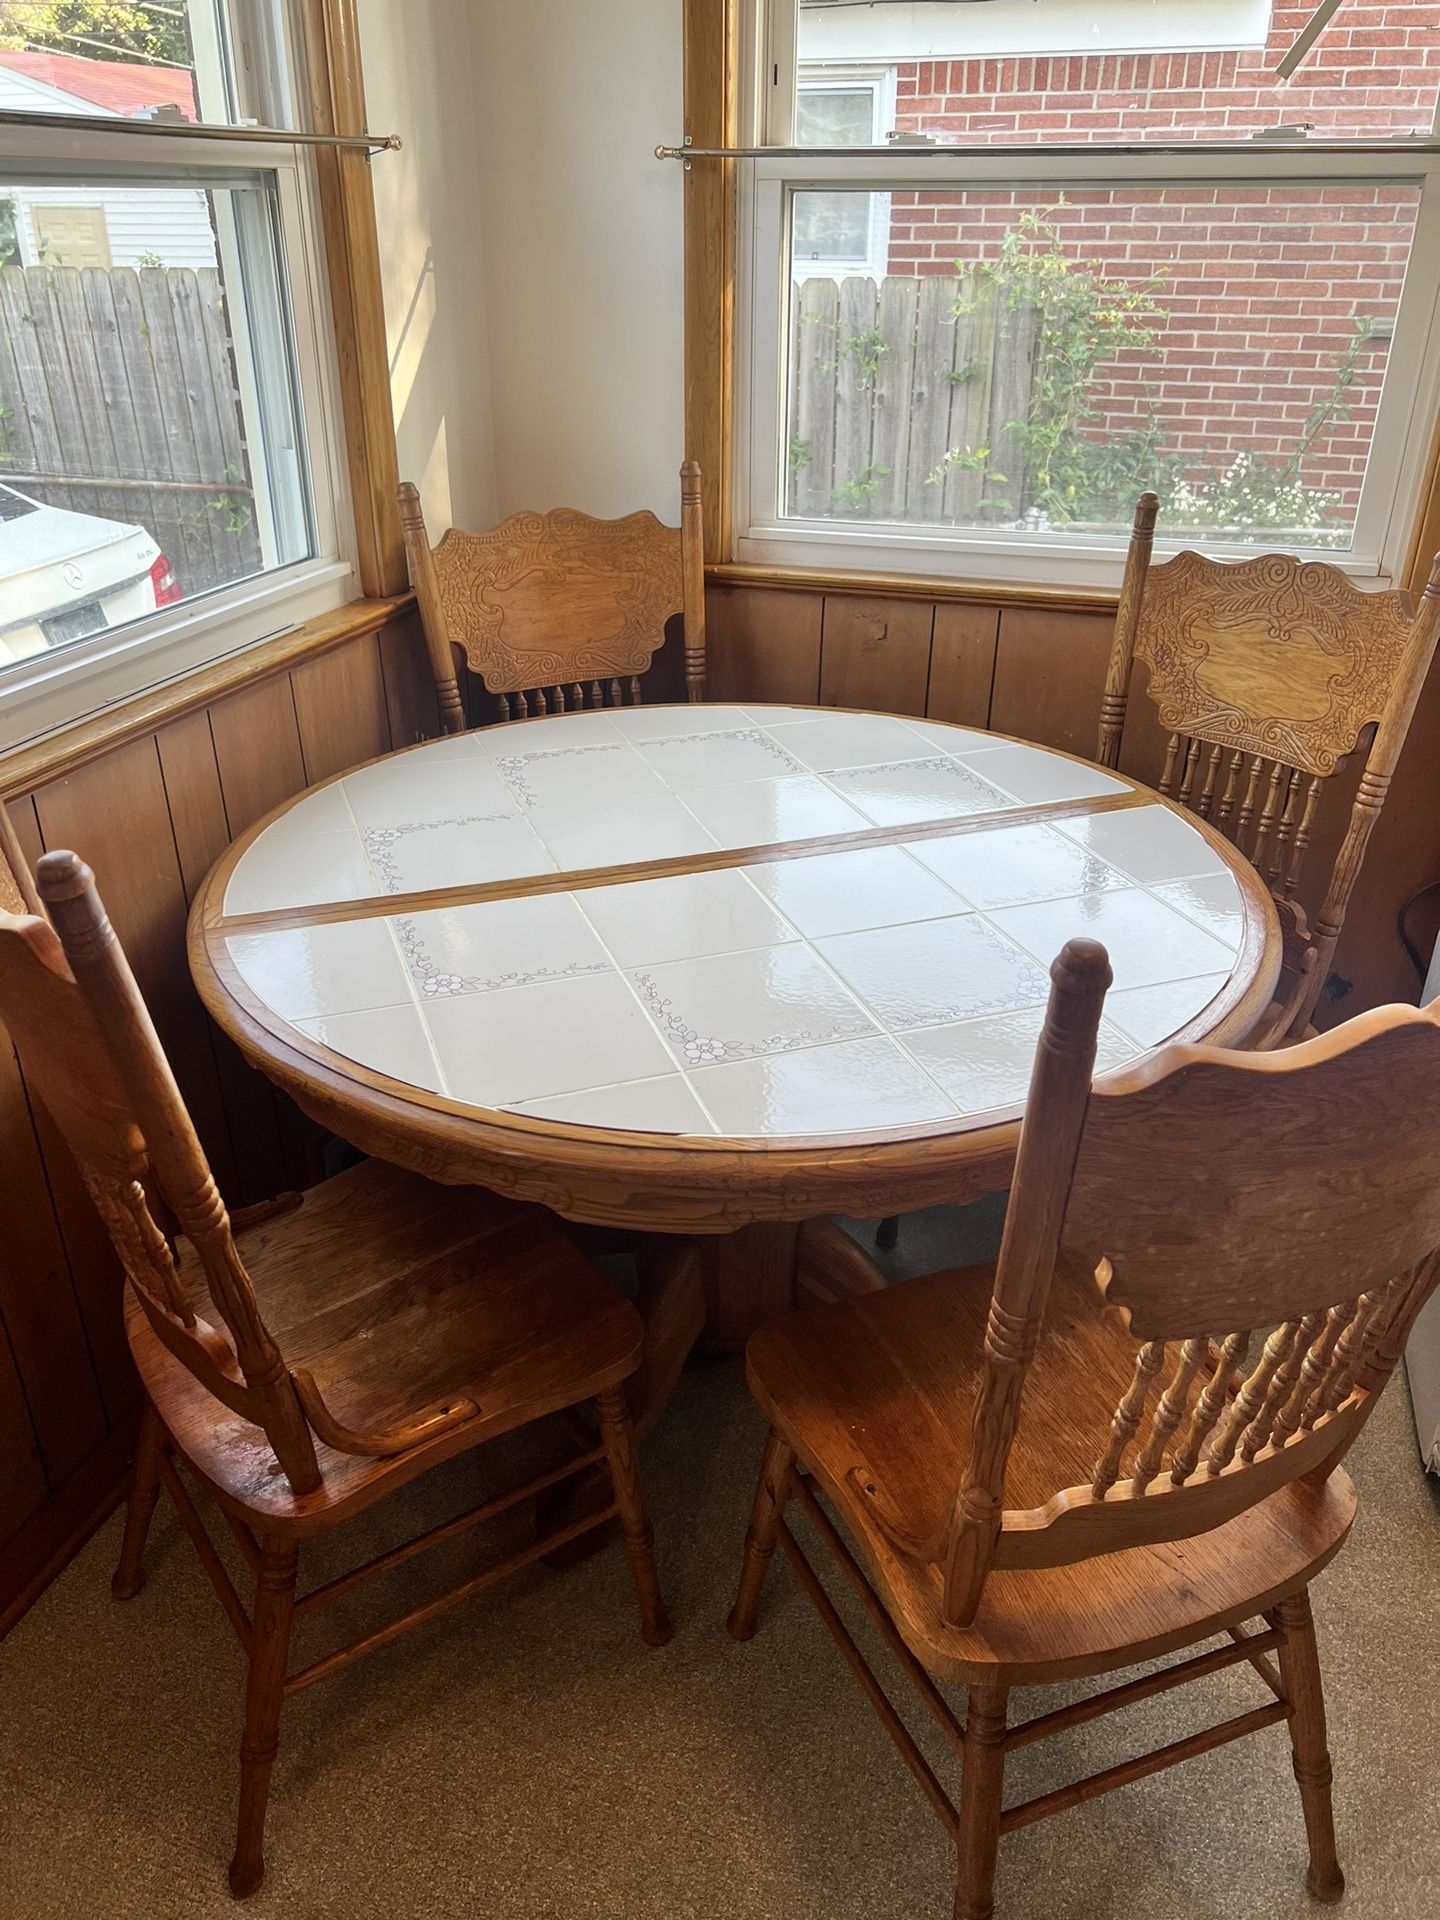 Kitchen Table With Four Chairs 